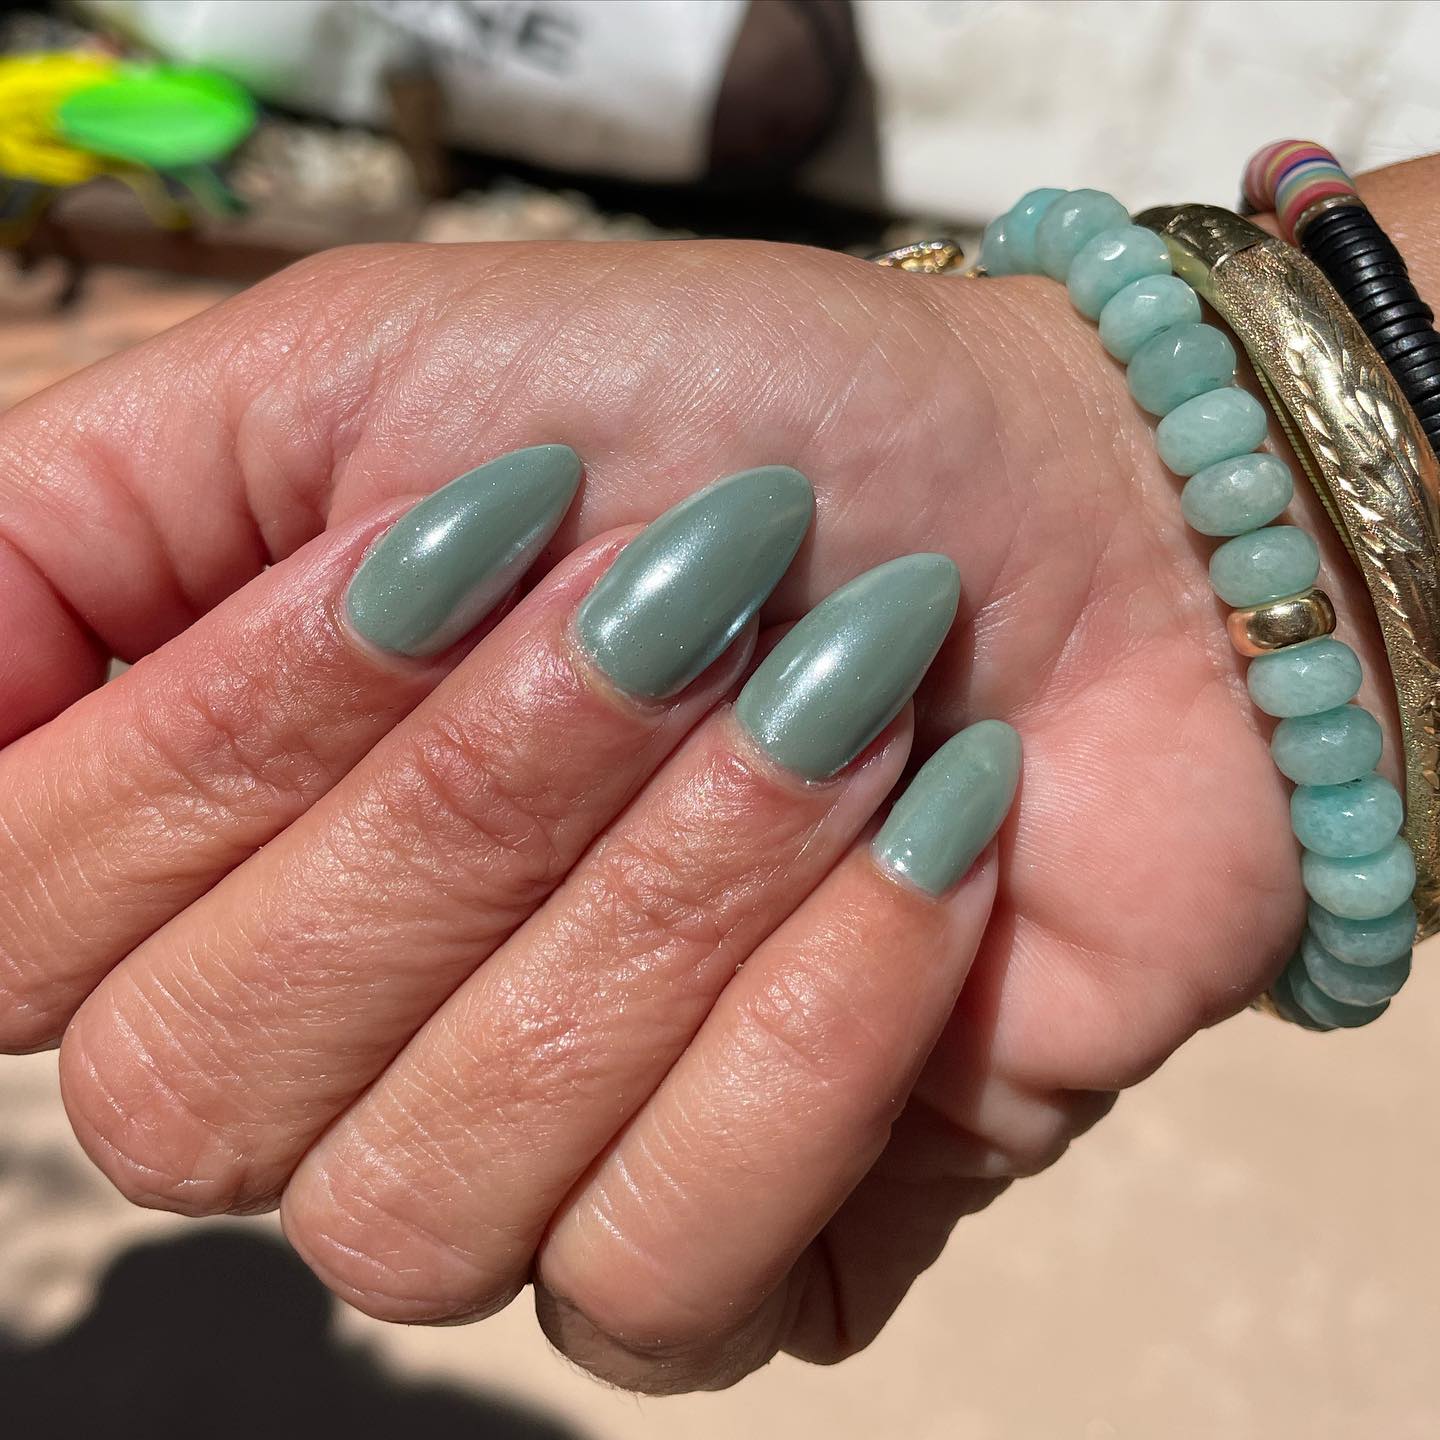 Sage green chrome is a pretty summer look. If you want to match your nails with your bracelet, the one above is a great idea.